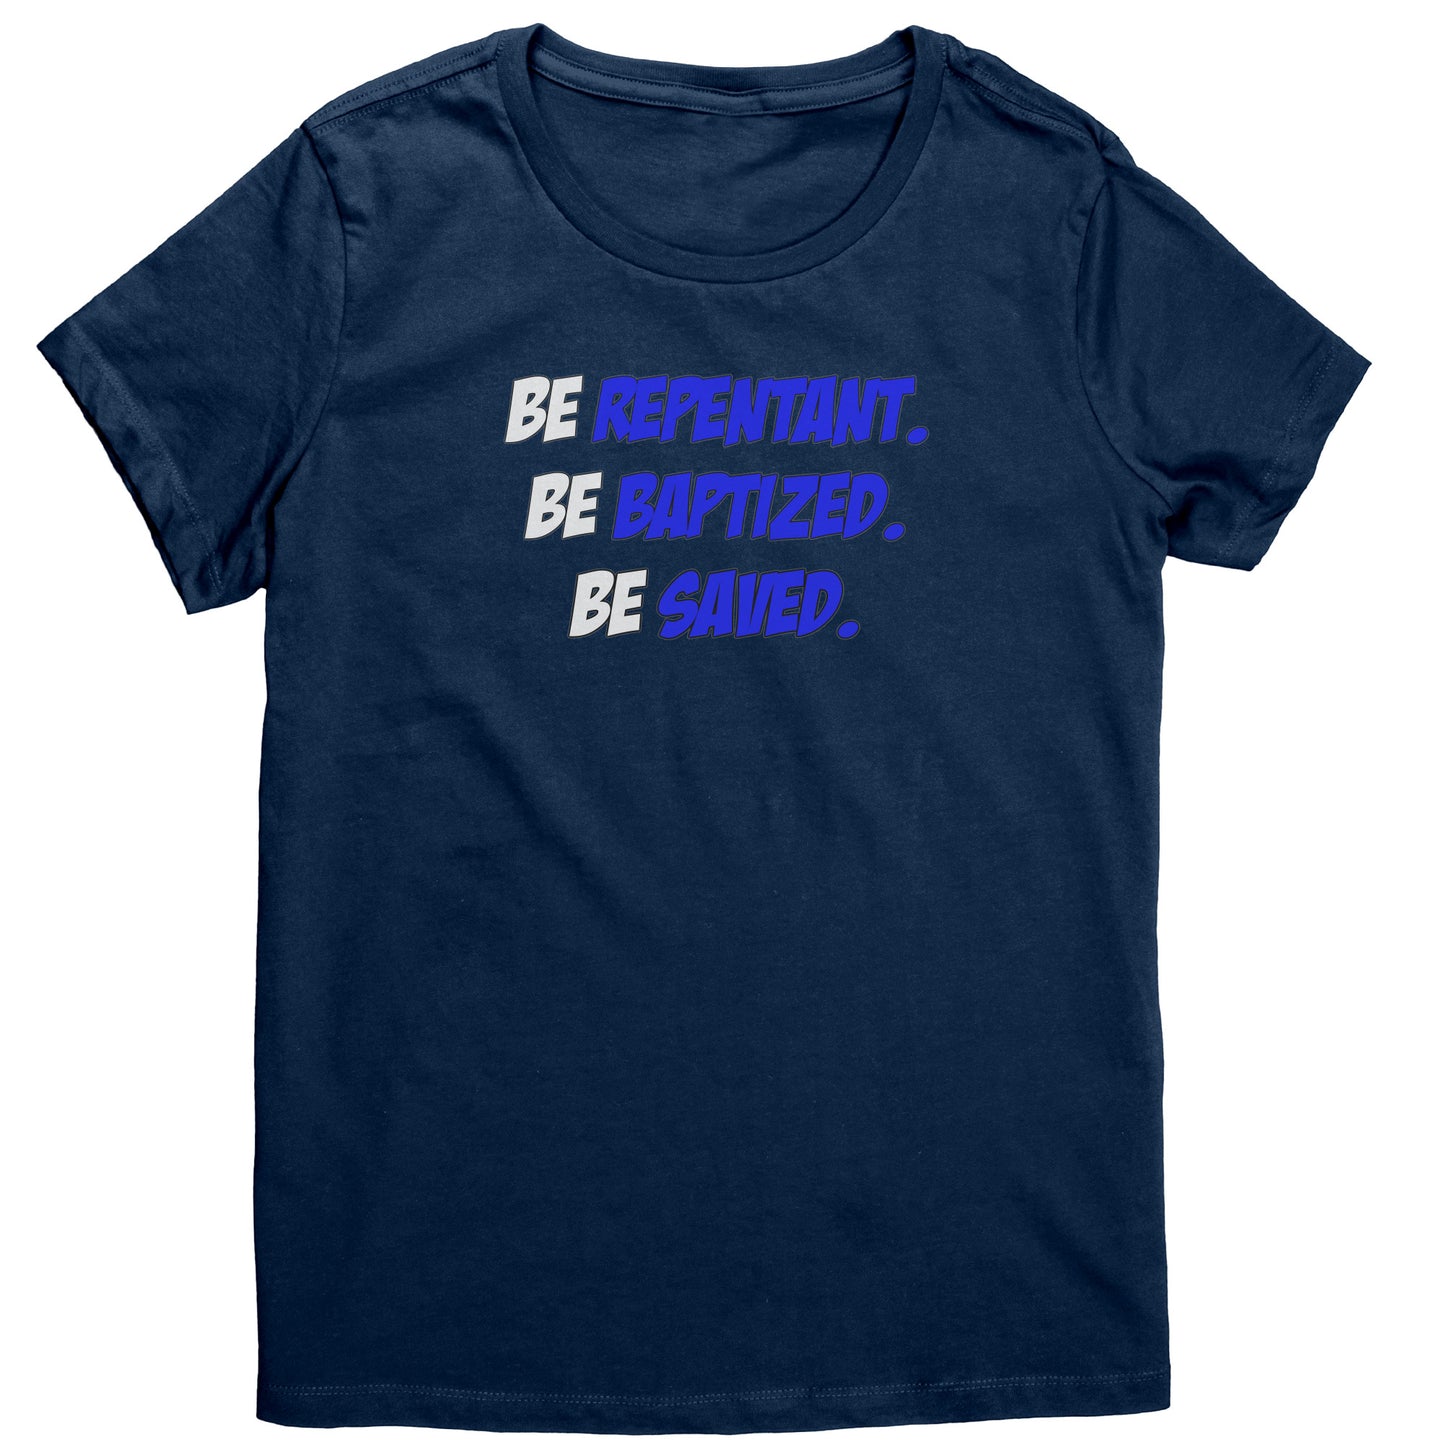 Be Repentant. Be Baptized. Be Saved Women's T-Shirt Part 1